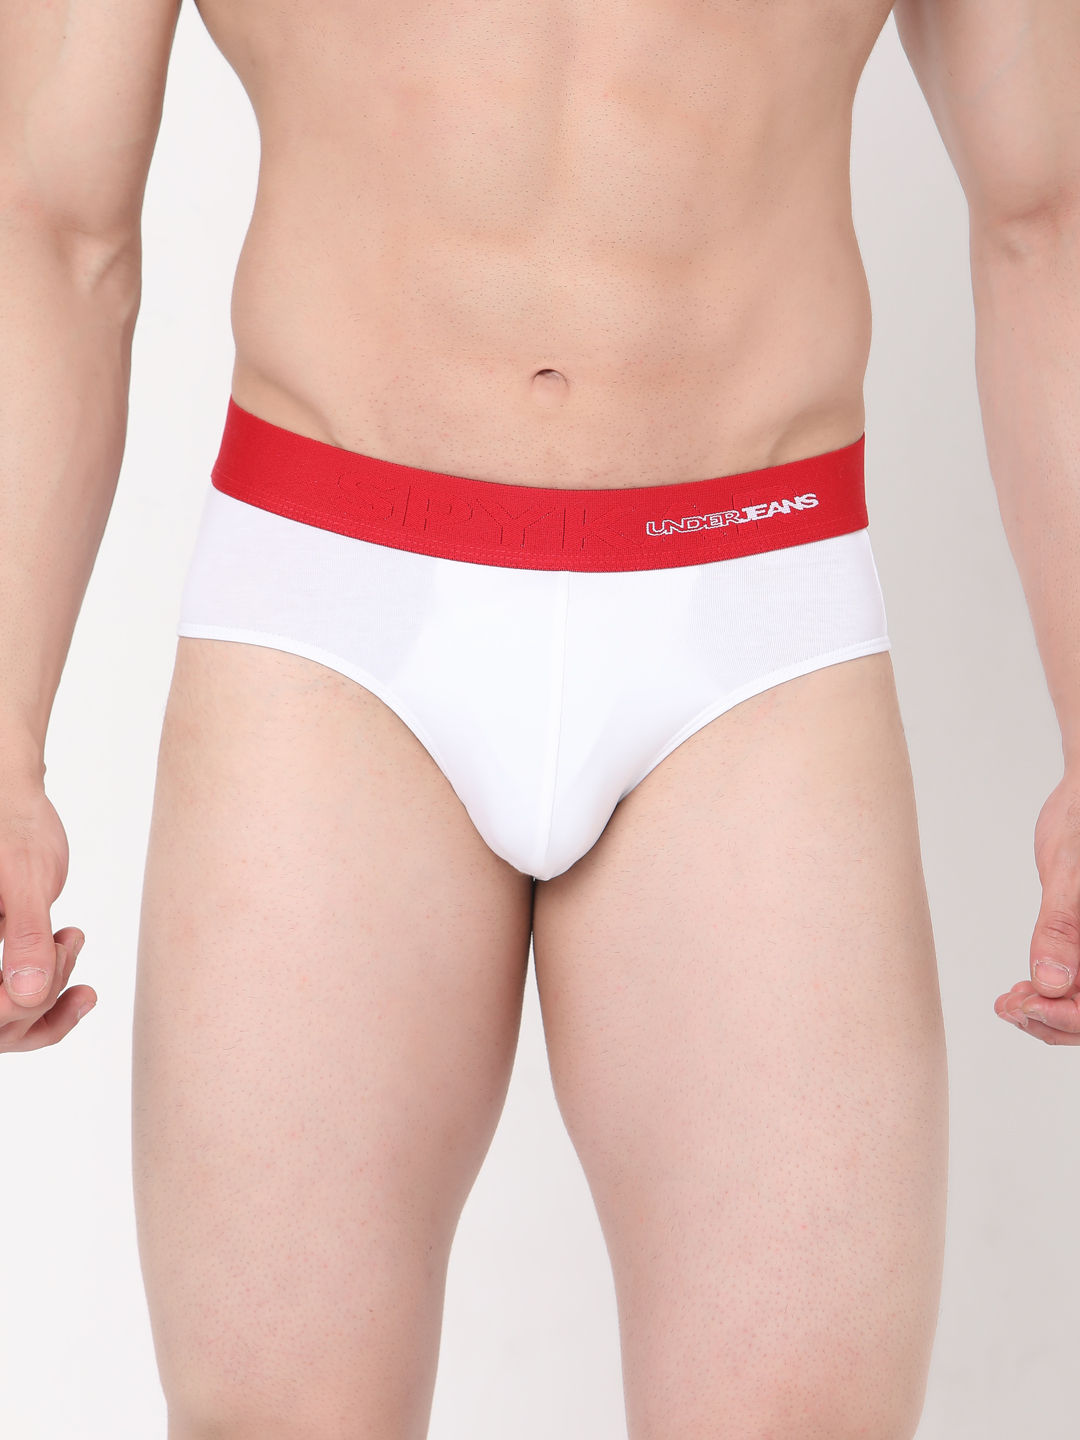 Underjeans by Spykar Mens Solid Brief - White (L)